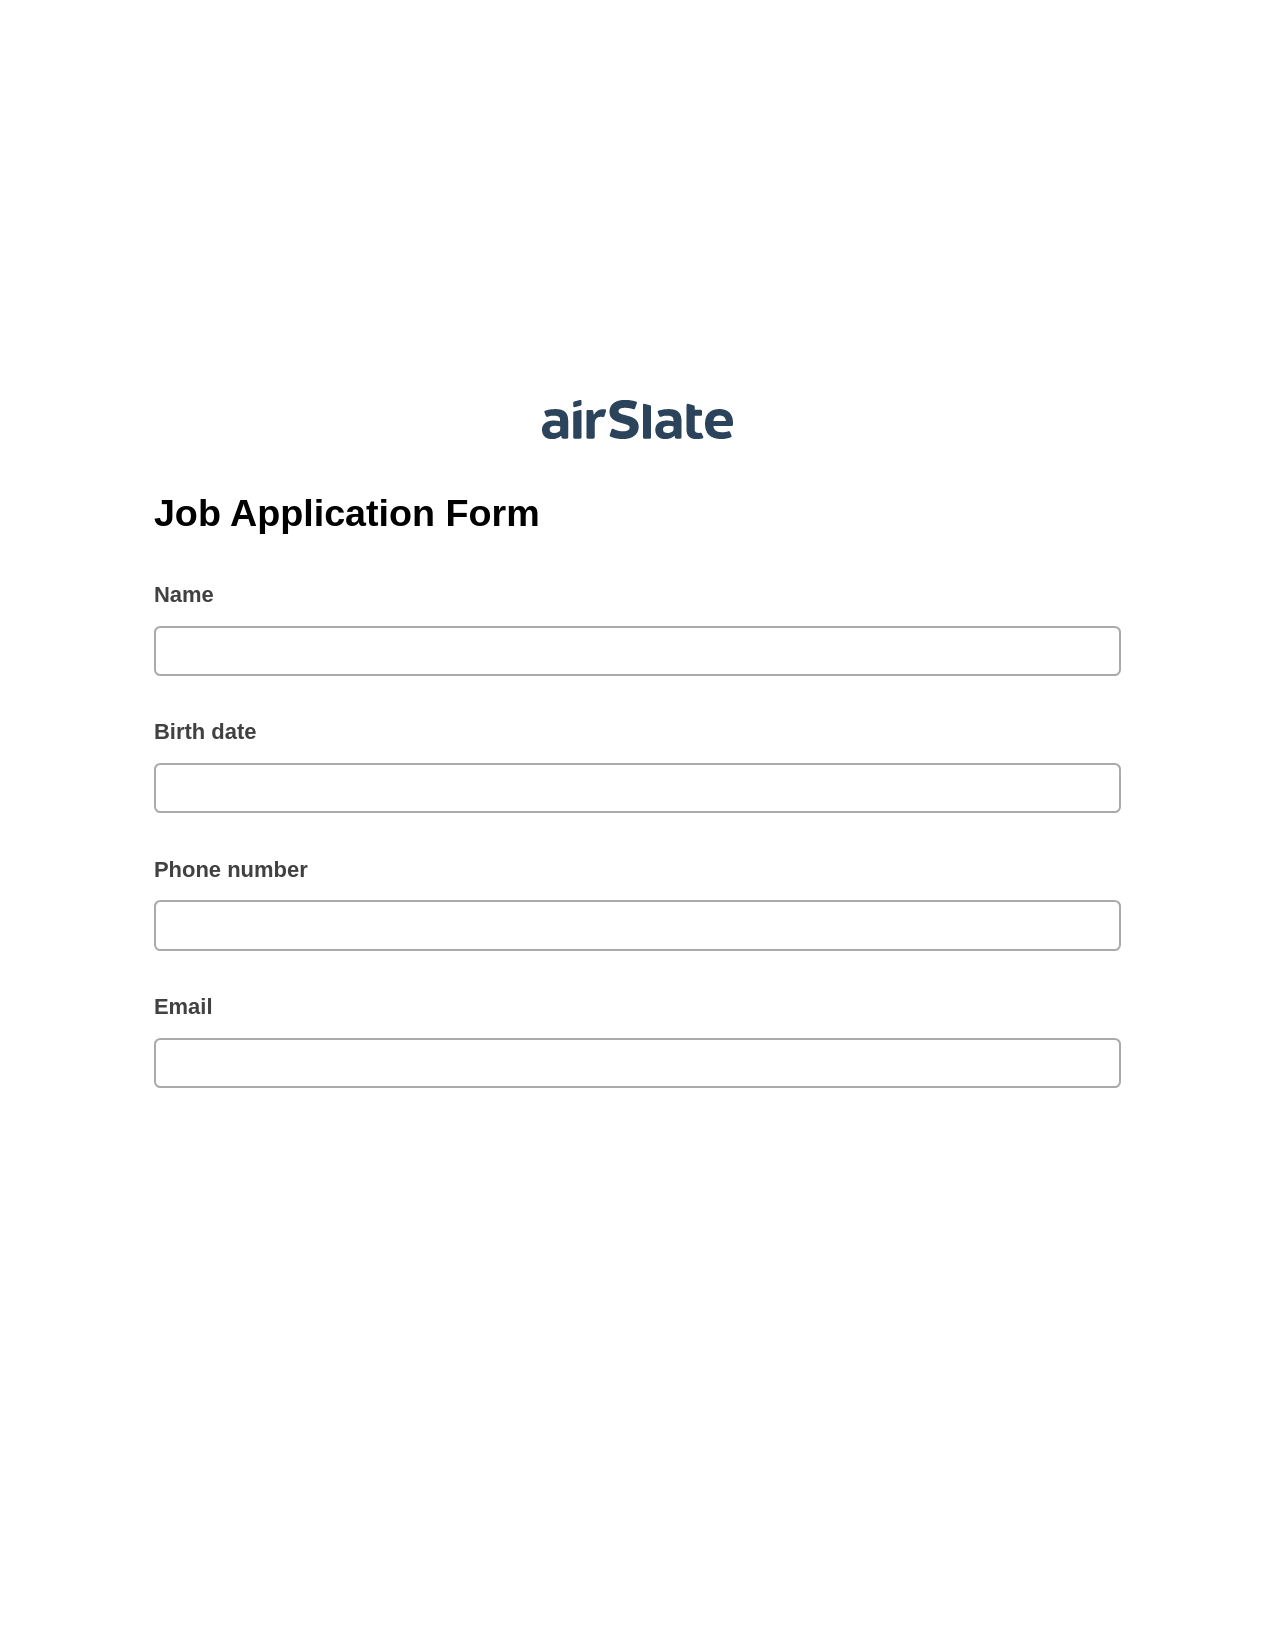 Multirole Job Application Form Pre-fill from Salesforce Record Bot, Create MS Dynamics 365 Records Bot, Export to Smartsheet